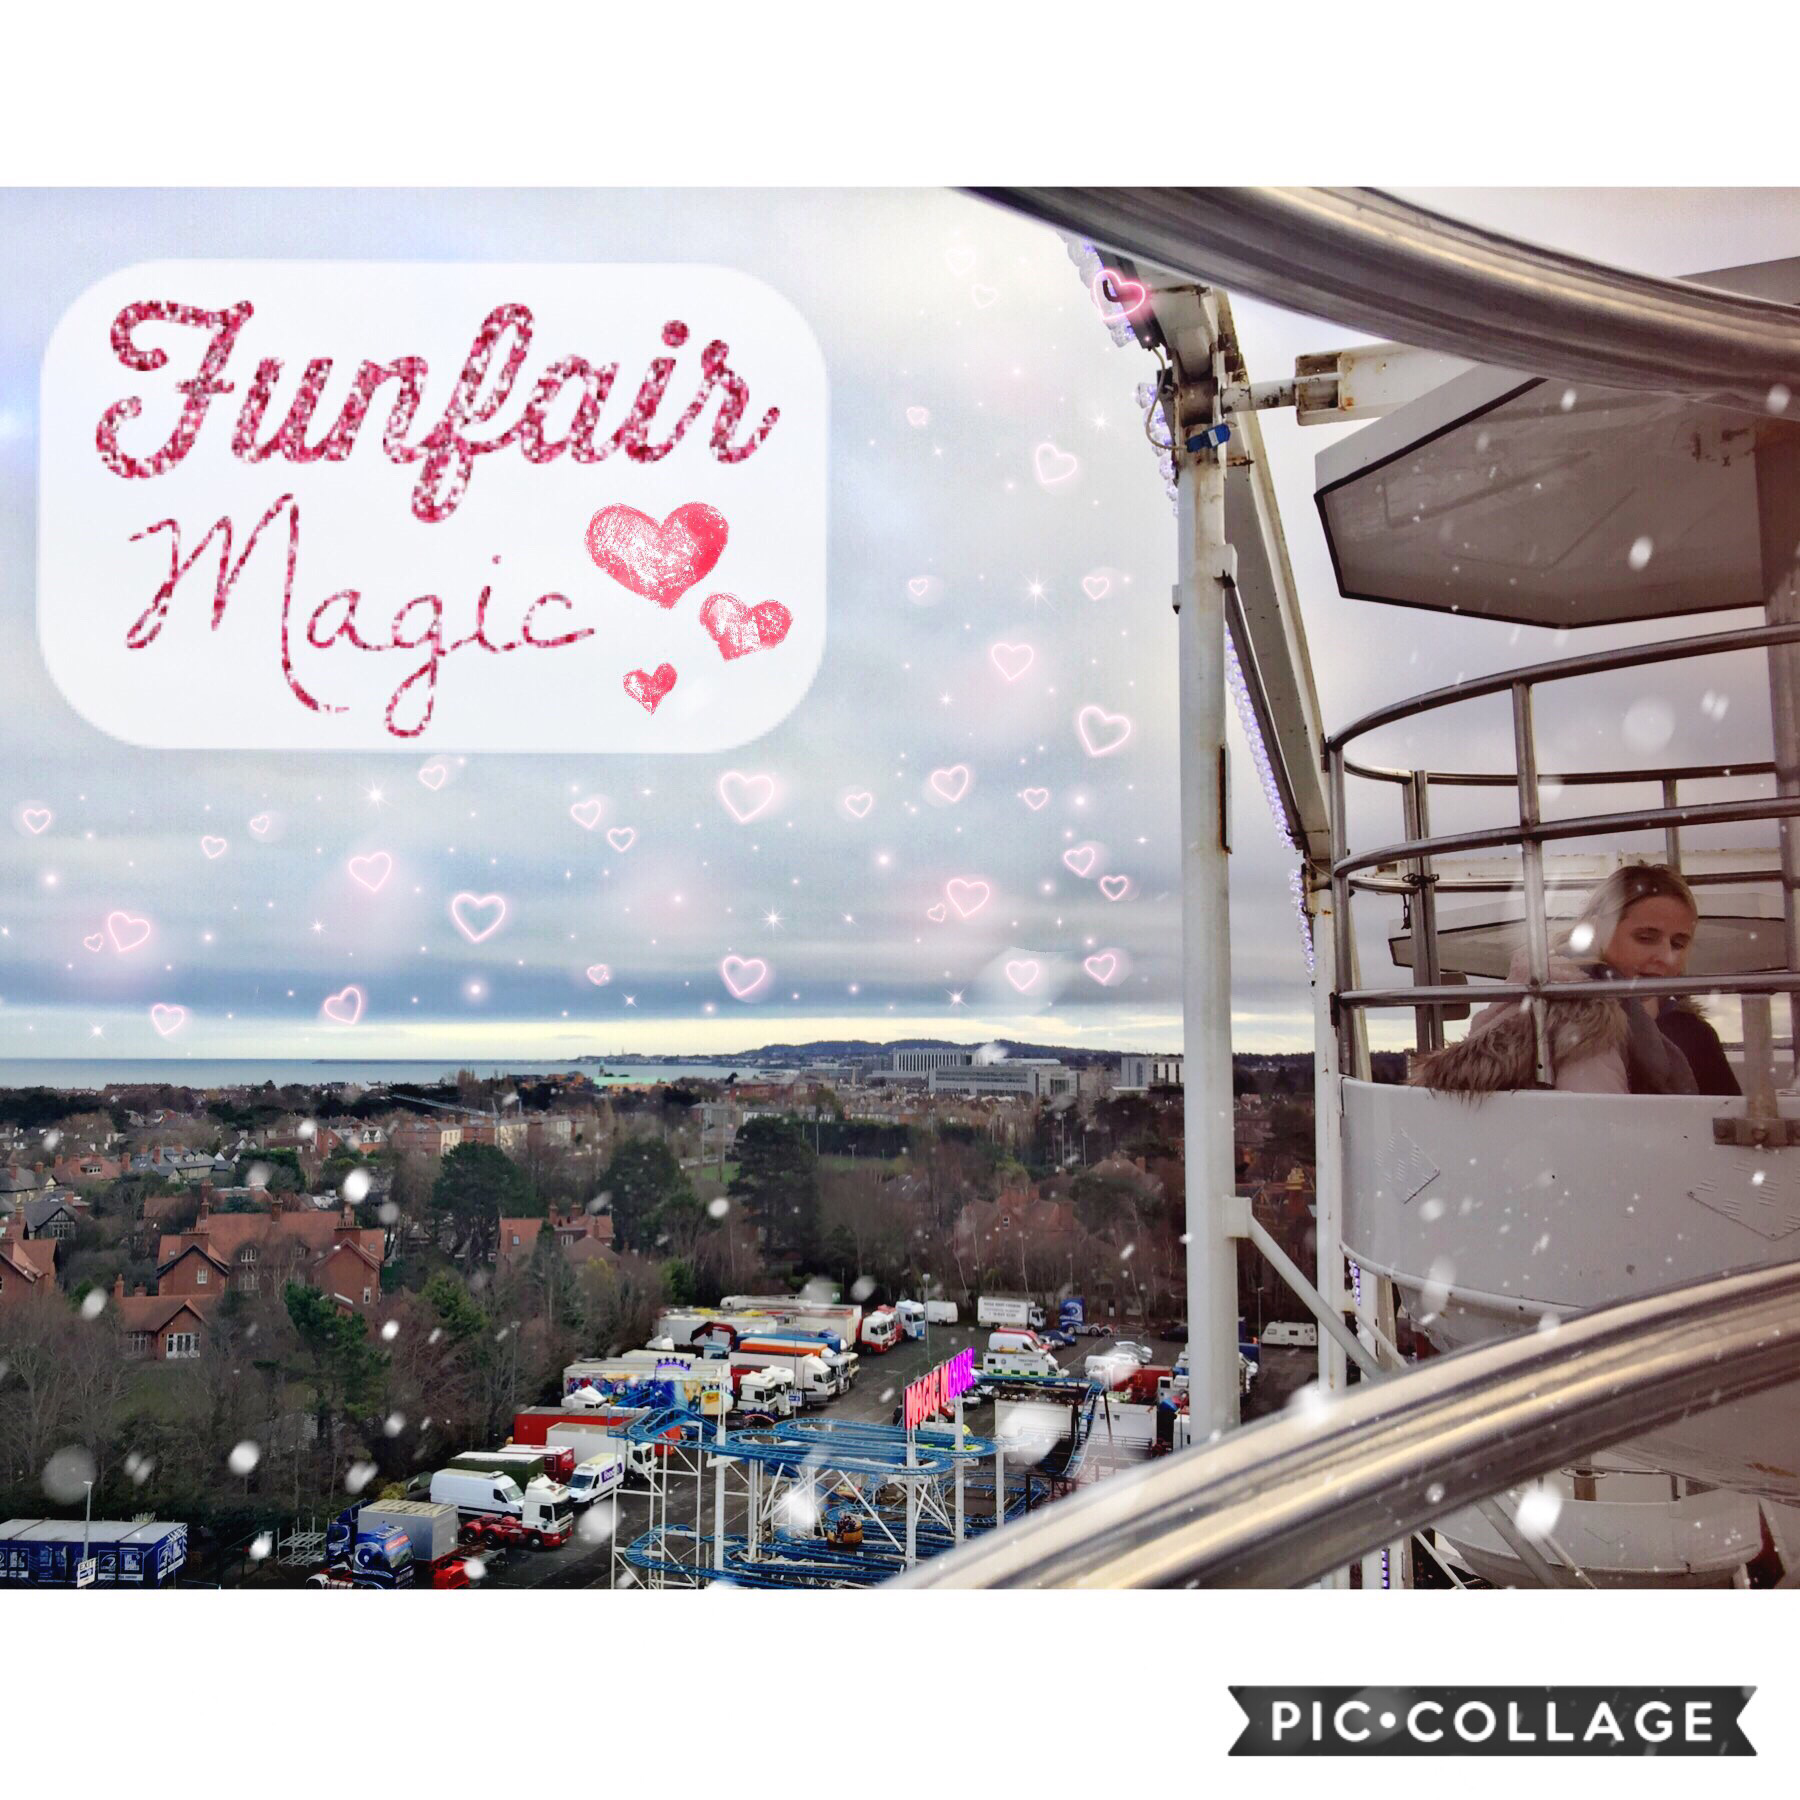 💕🎡💭
My pic from the top of the Ferris Wheel where we got stuck 😂